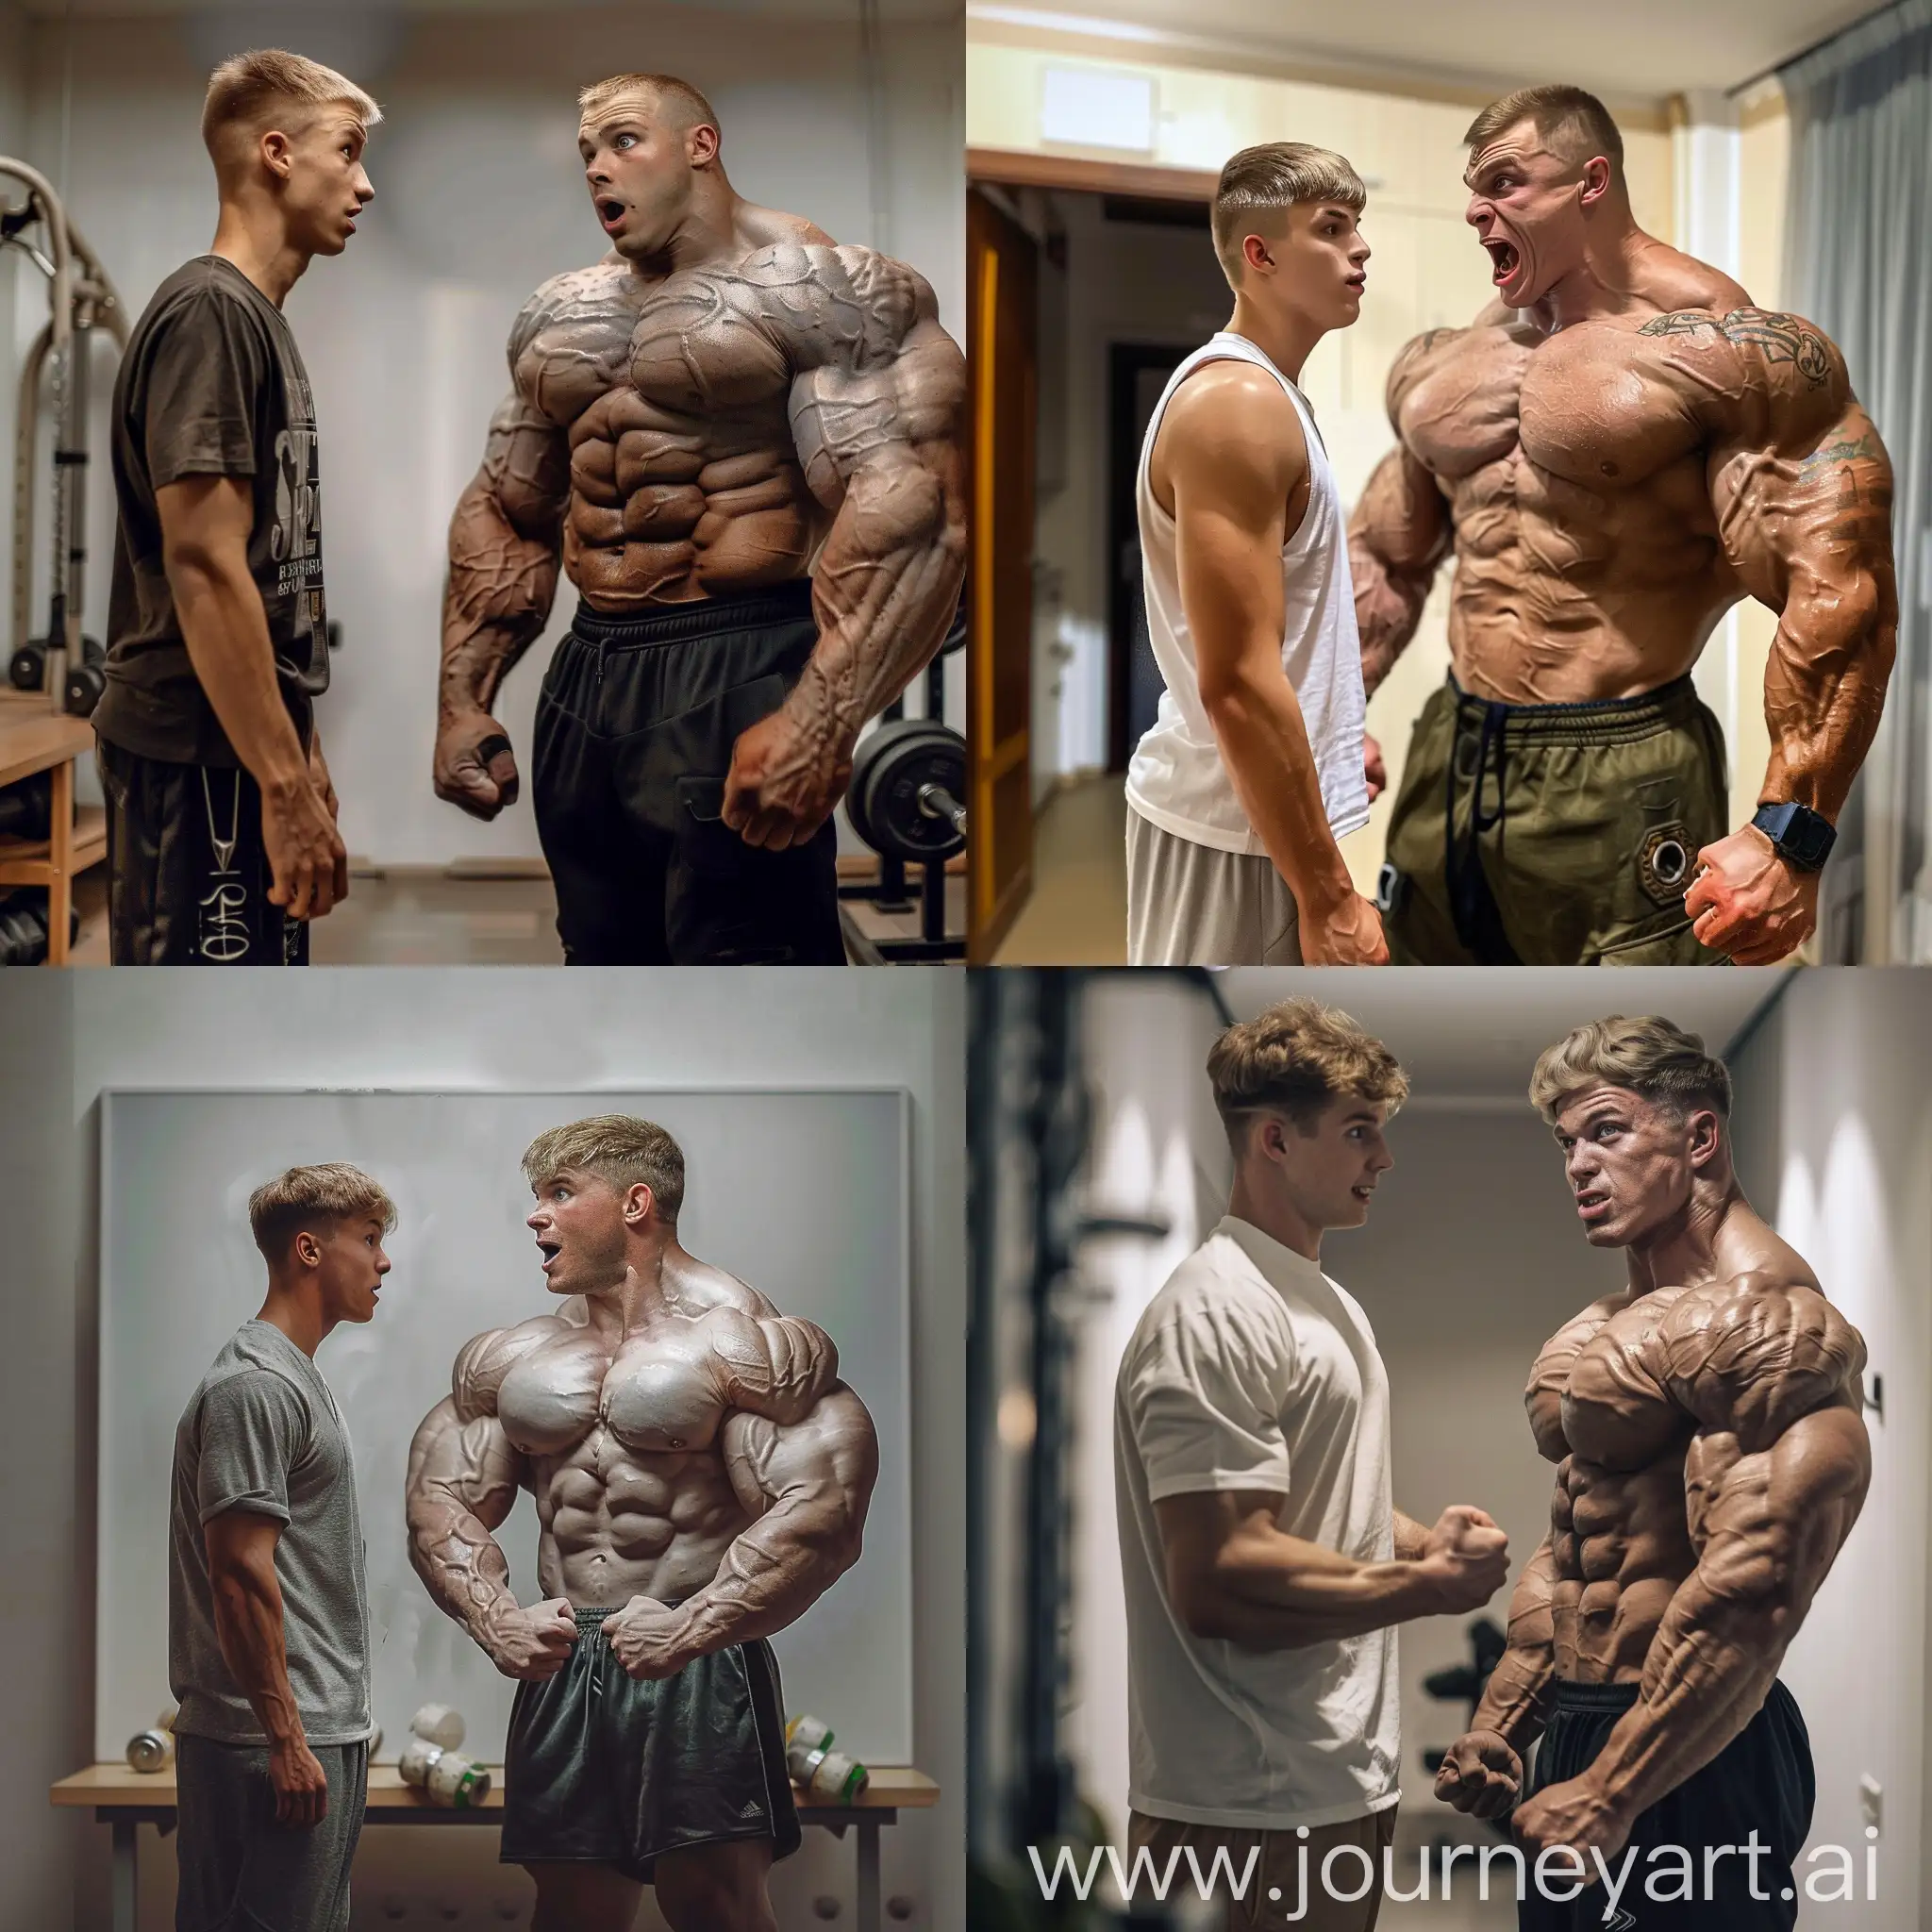 Young-Man-Surprised-by-Transformation-From-Thin-to-Muscular-Twin